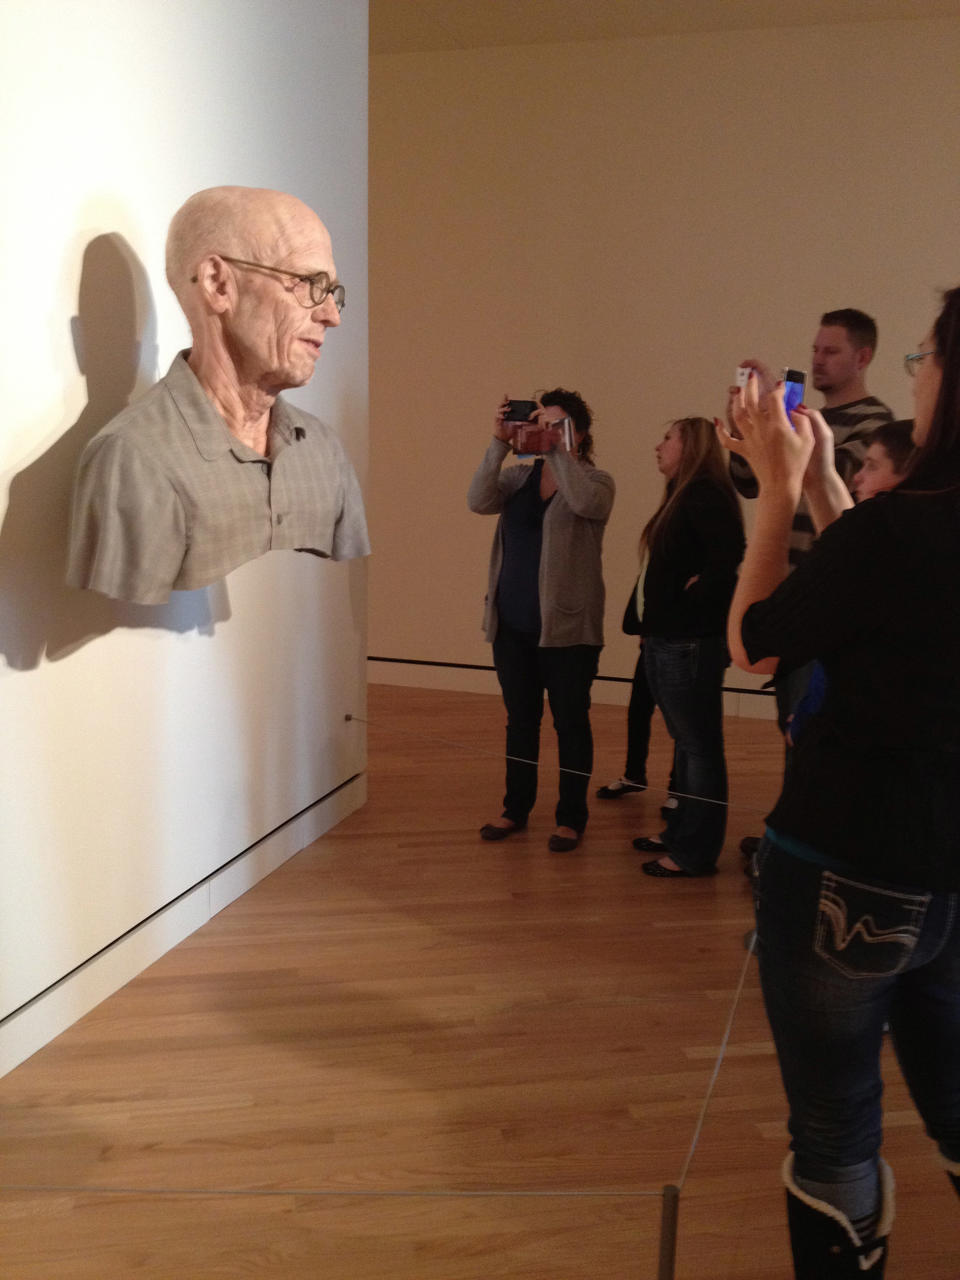 This Sunday, Feb. 26, 2012 photo shows patrons at Crystal Bridges Museum of American Art in Bentonville, Ark., looking at a sculpture by Evan Penny titled “Old Self: Portrait of the Artist as He Will (Not) Be. Variation #2." More than 175,000 people have visited the museum funded by Wal-Mart heiress Alice Walton since it opened in November 2012, bringing a major museum to the Southern Plains. Nearly four months after opening in November, the museum has already had over 175,000 visitors. (AP Photo/Chuck Bartels)